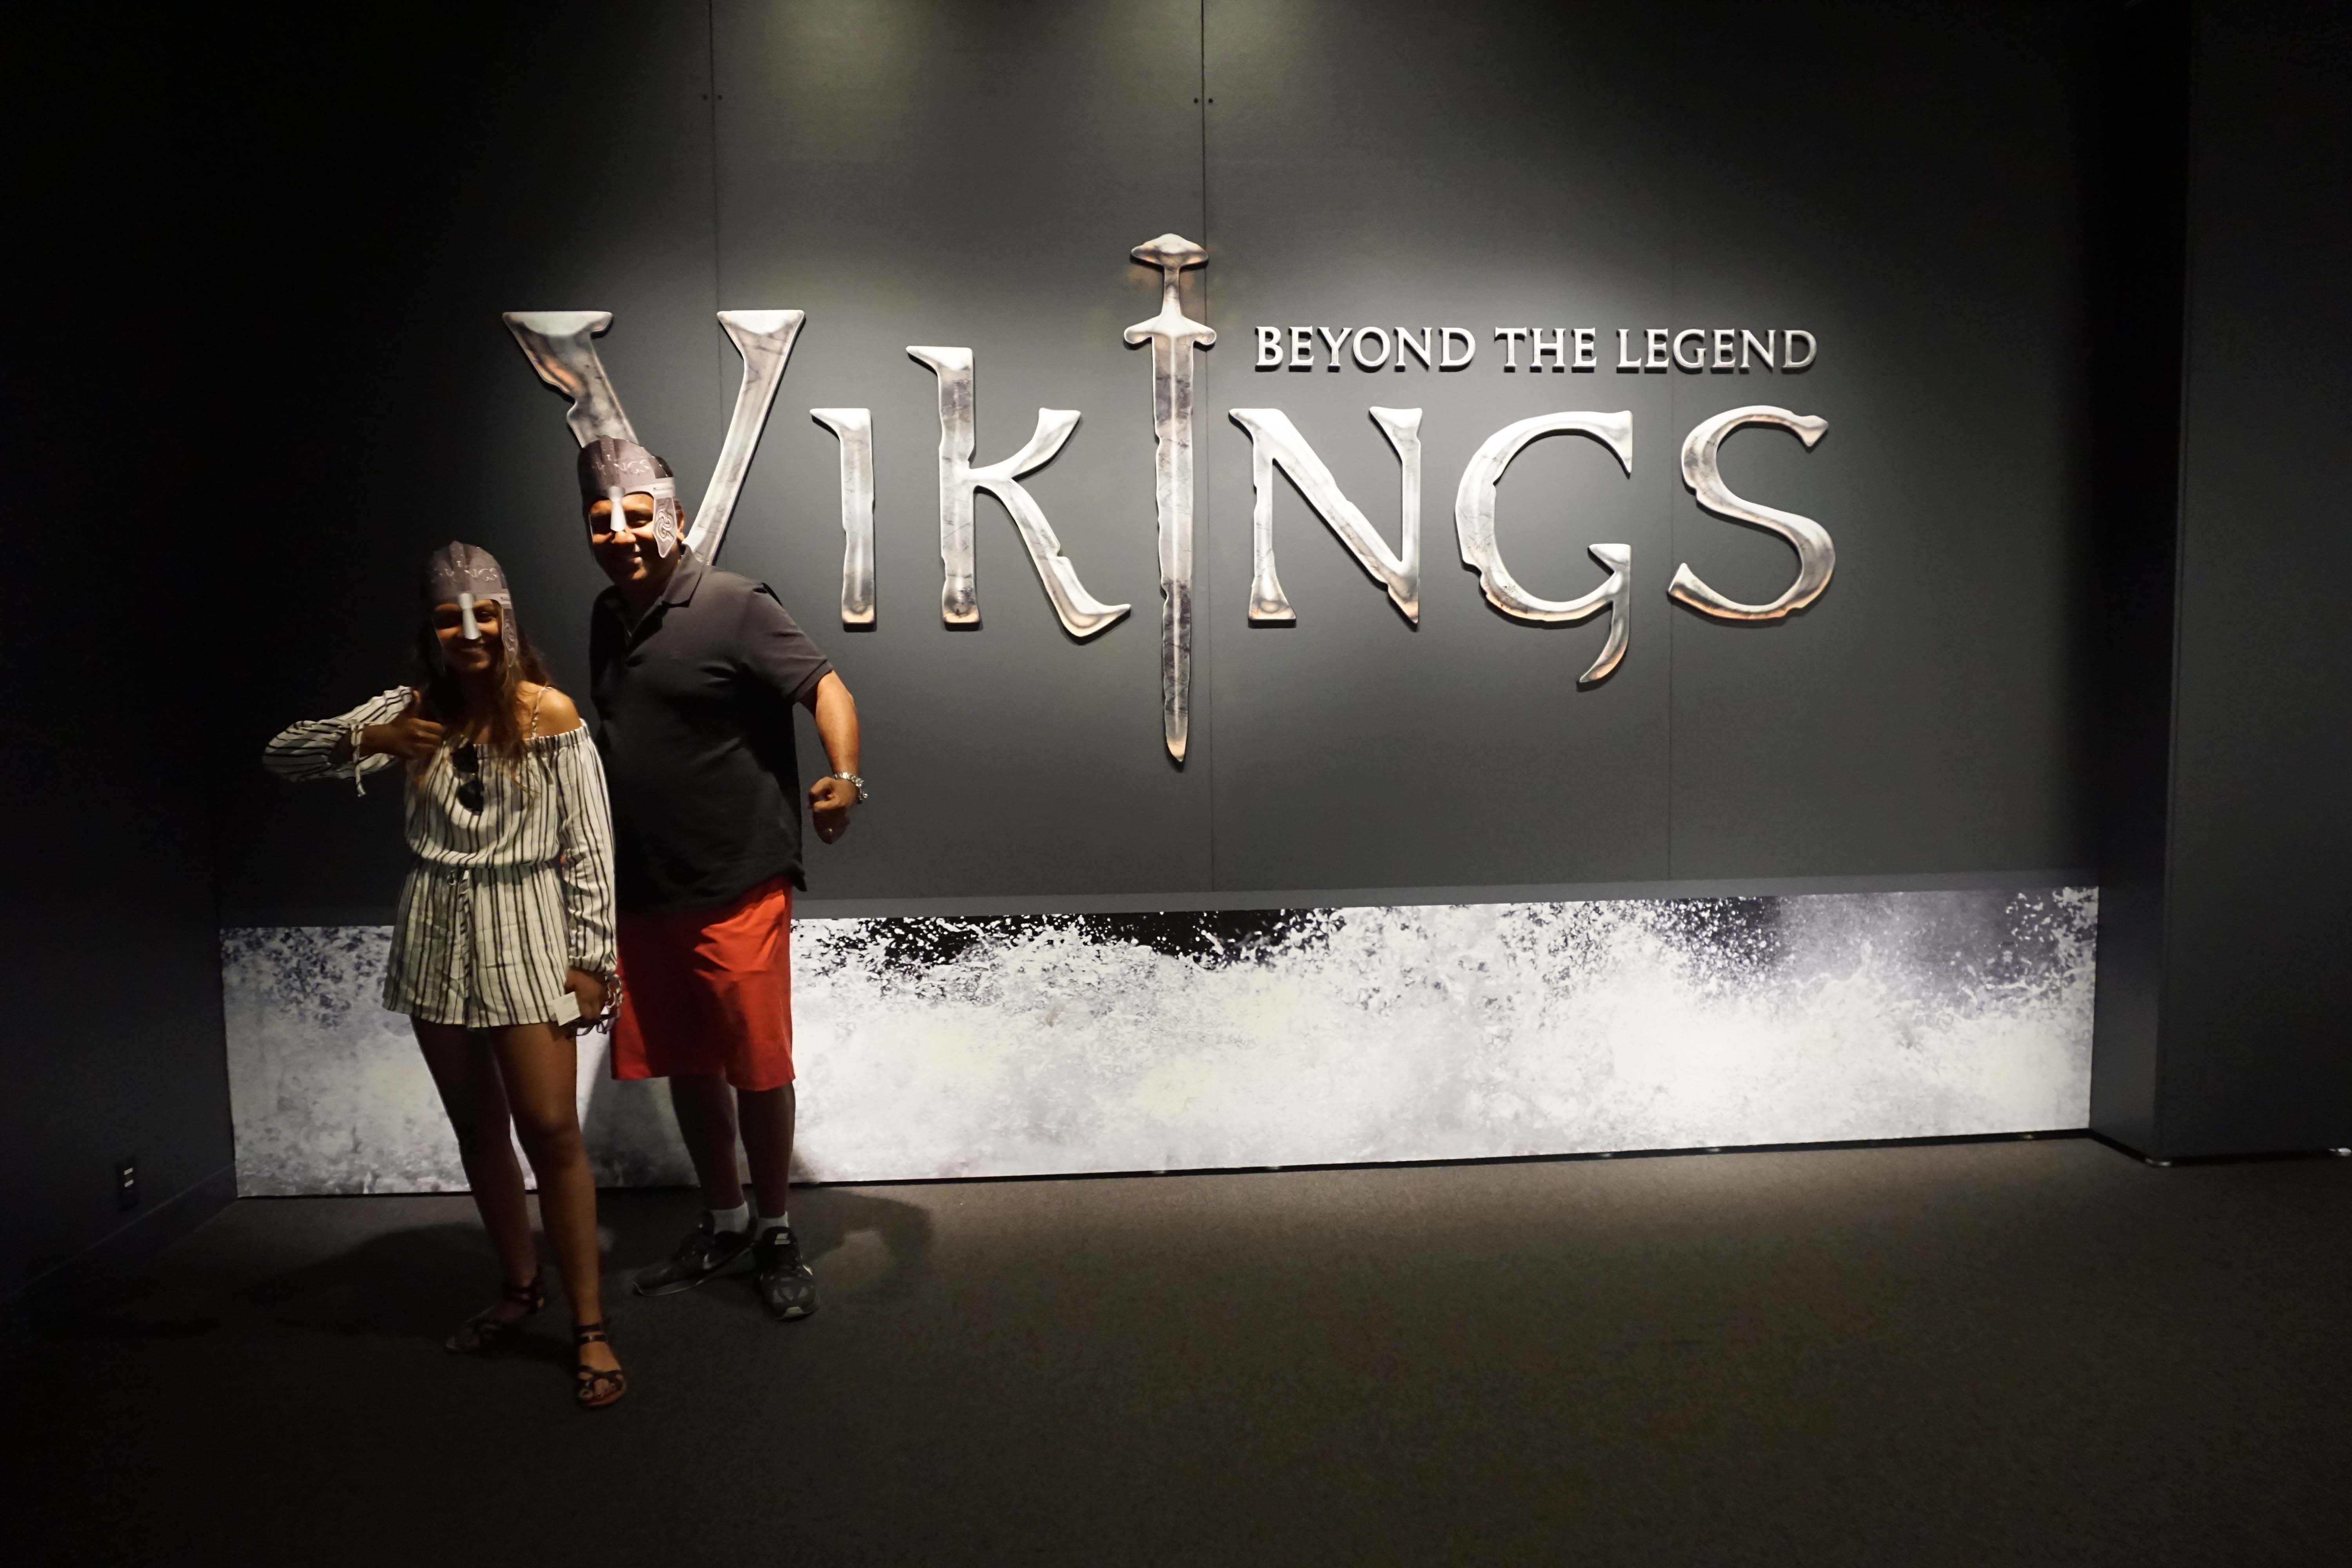 Vikings Exhibit at the Denver Museum. See the all other things to do in Denver, Colorado with kids #Denver #Colorado #ThingsToDo